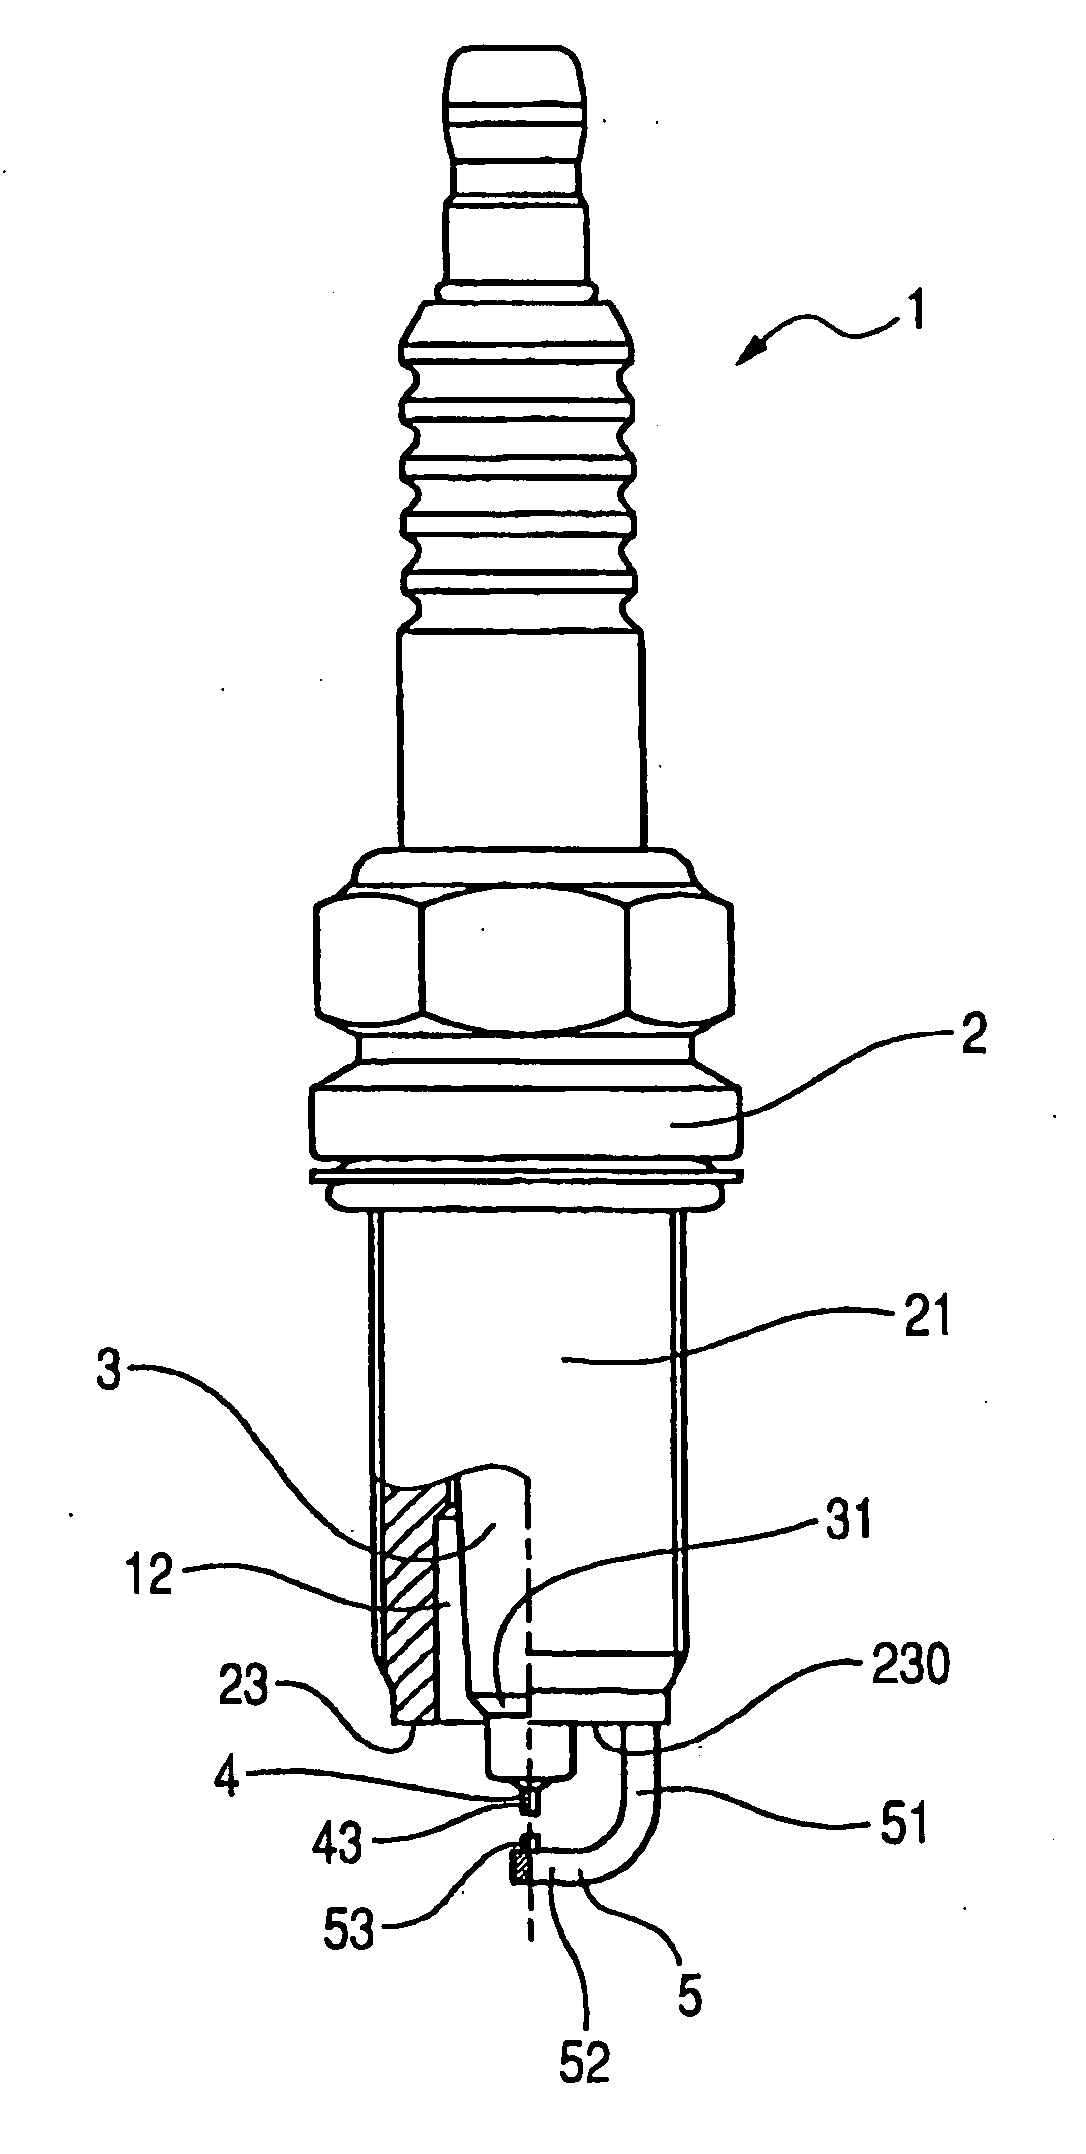 Spark plug designed to ensure stability of ignition of air-fuel mixture